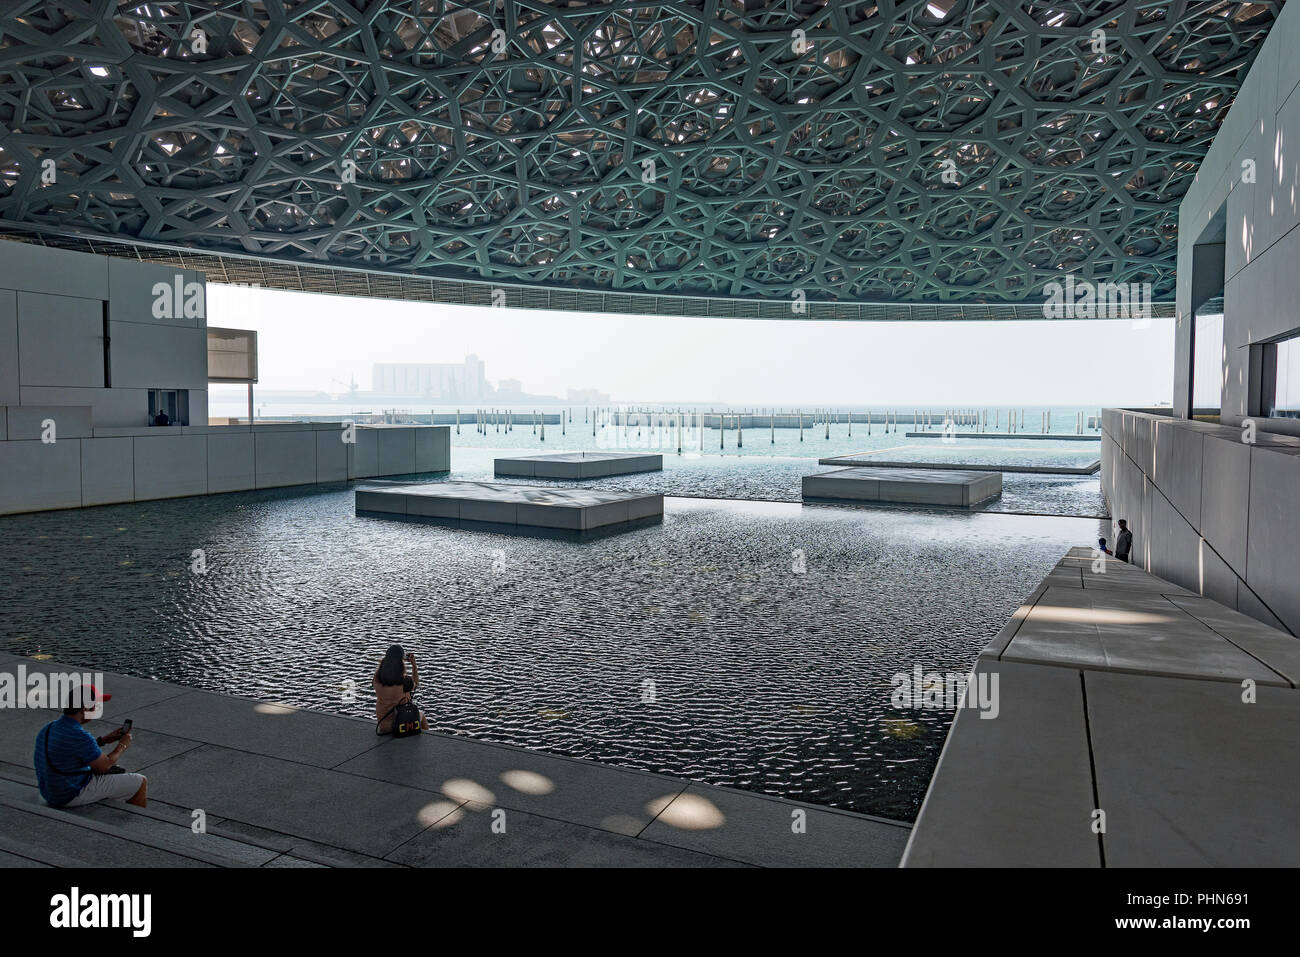 Images of the inside courtyard of the Louvre Abu Dhabi, U.A.E. Stock Photo